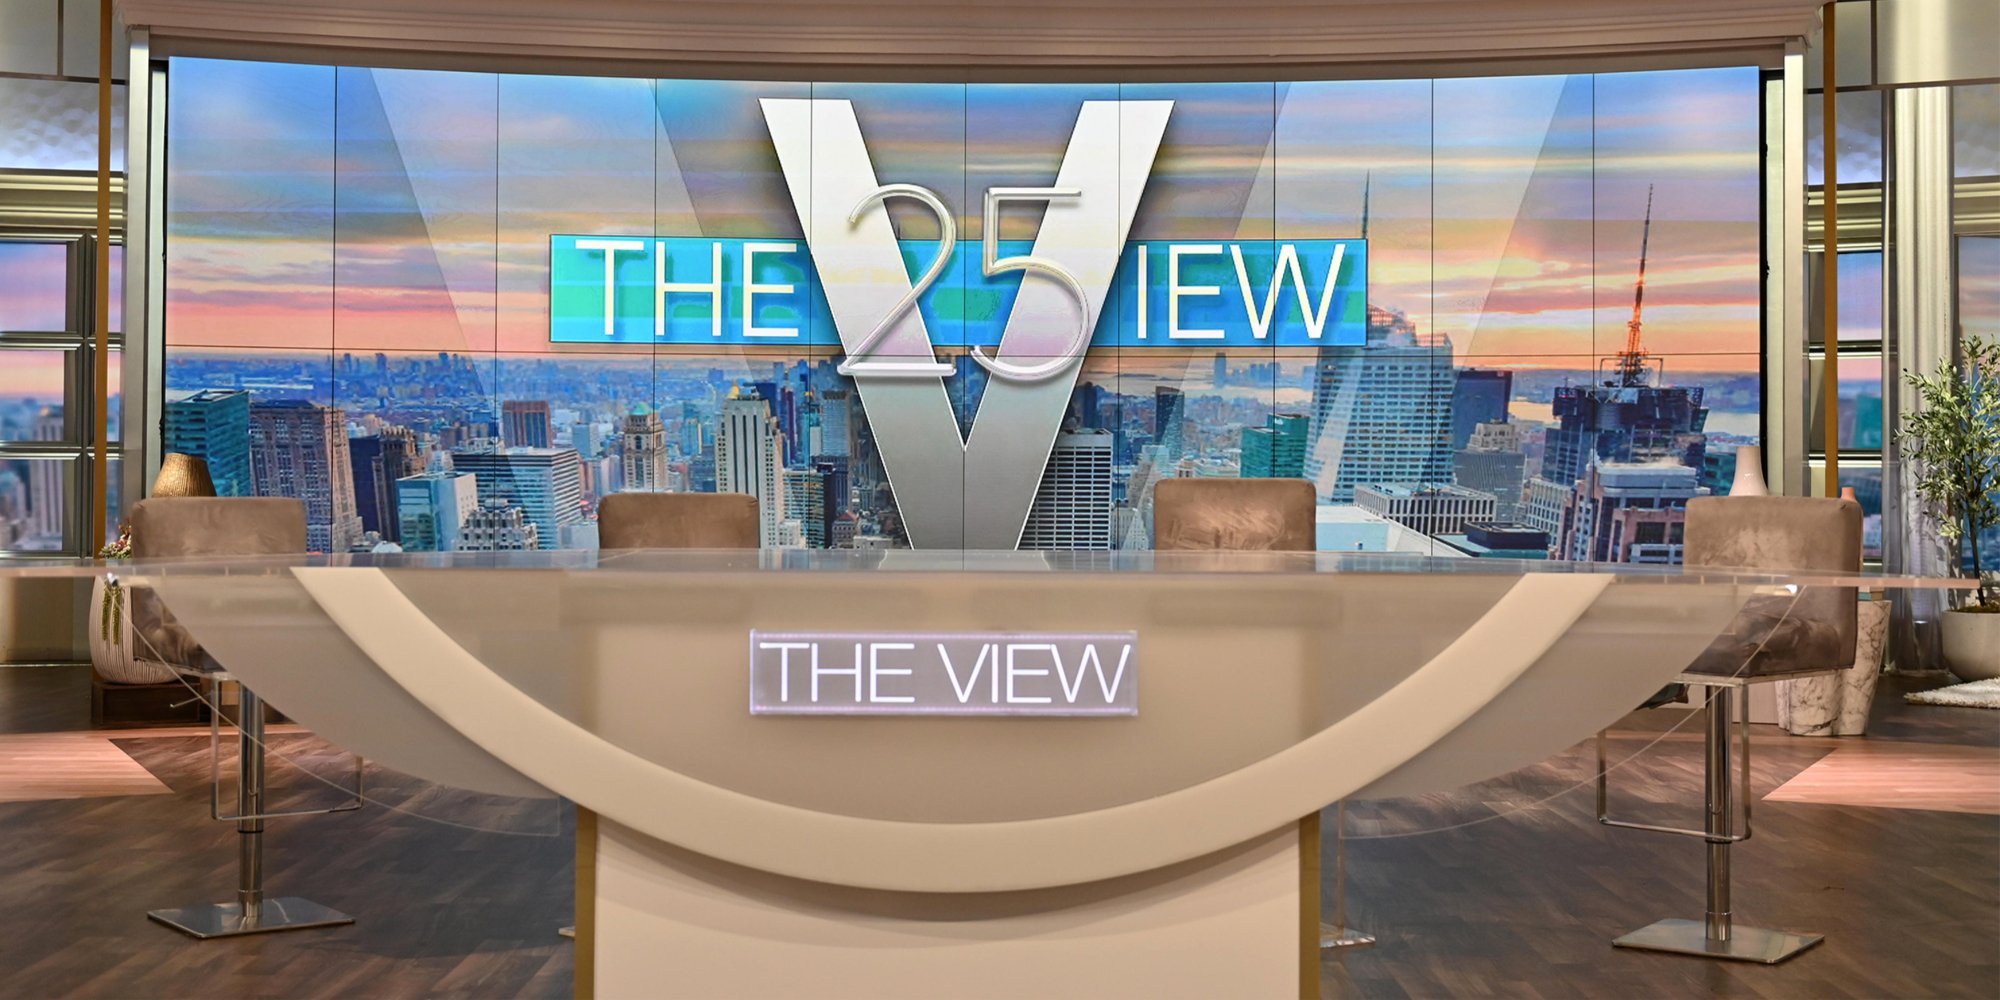 The set of ABC's 'The View 'for its 25th anniversary season.